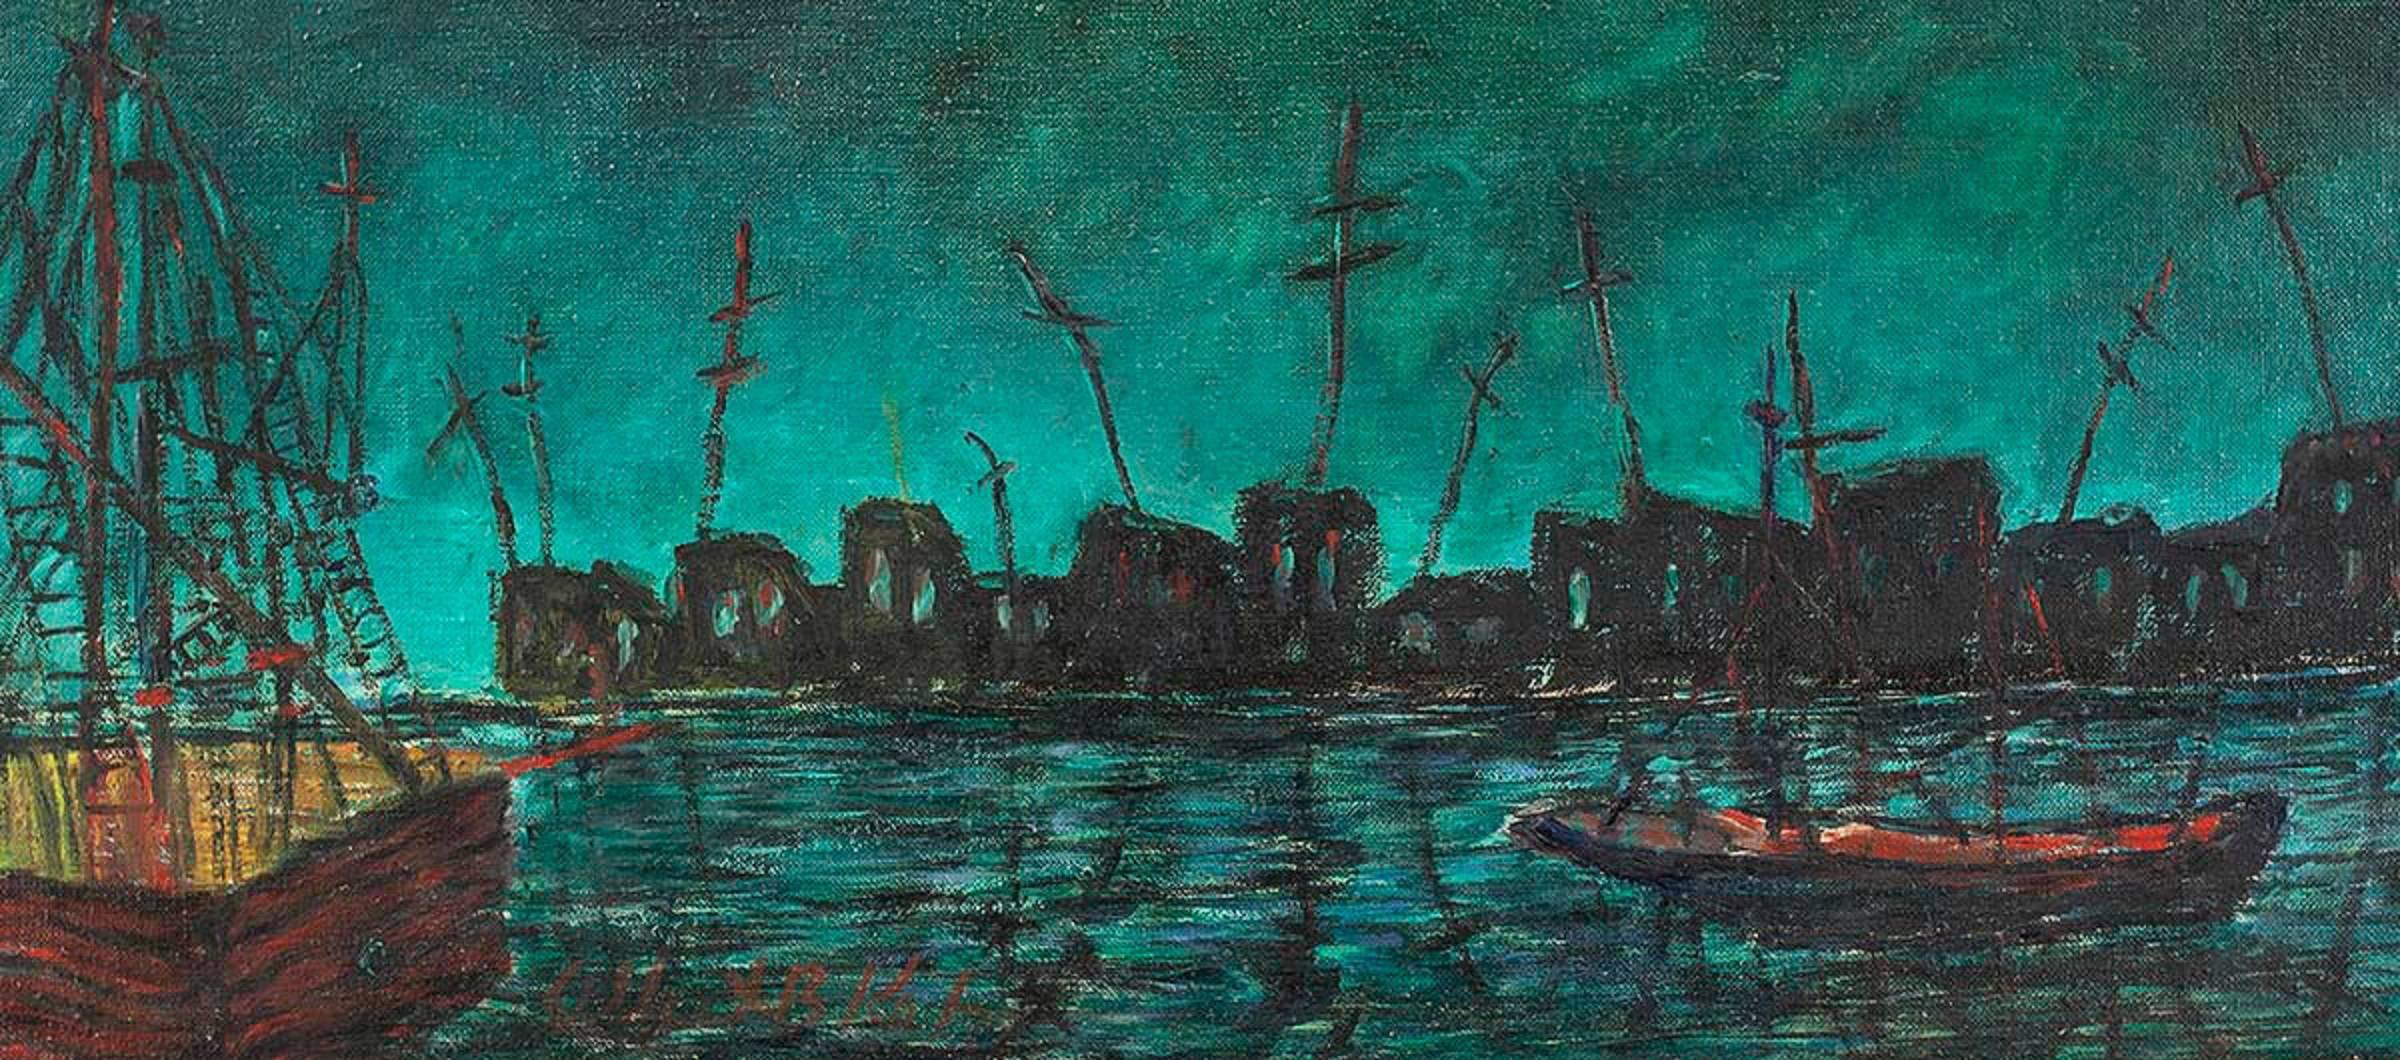 Sailing Ships - Painting by Unknown